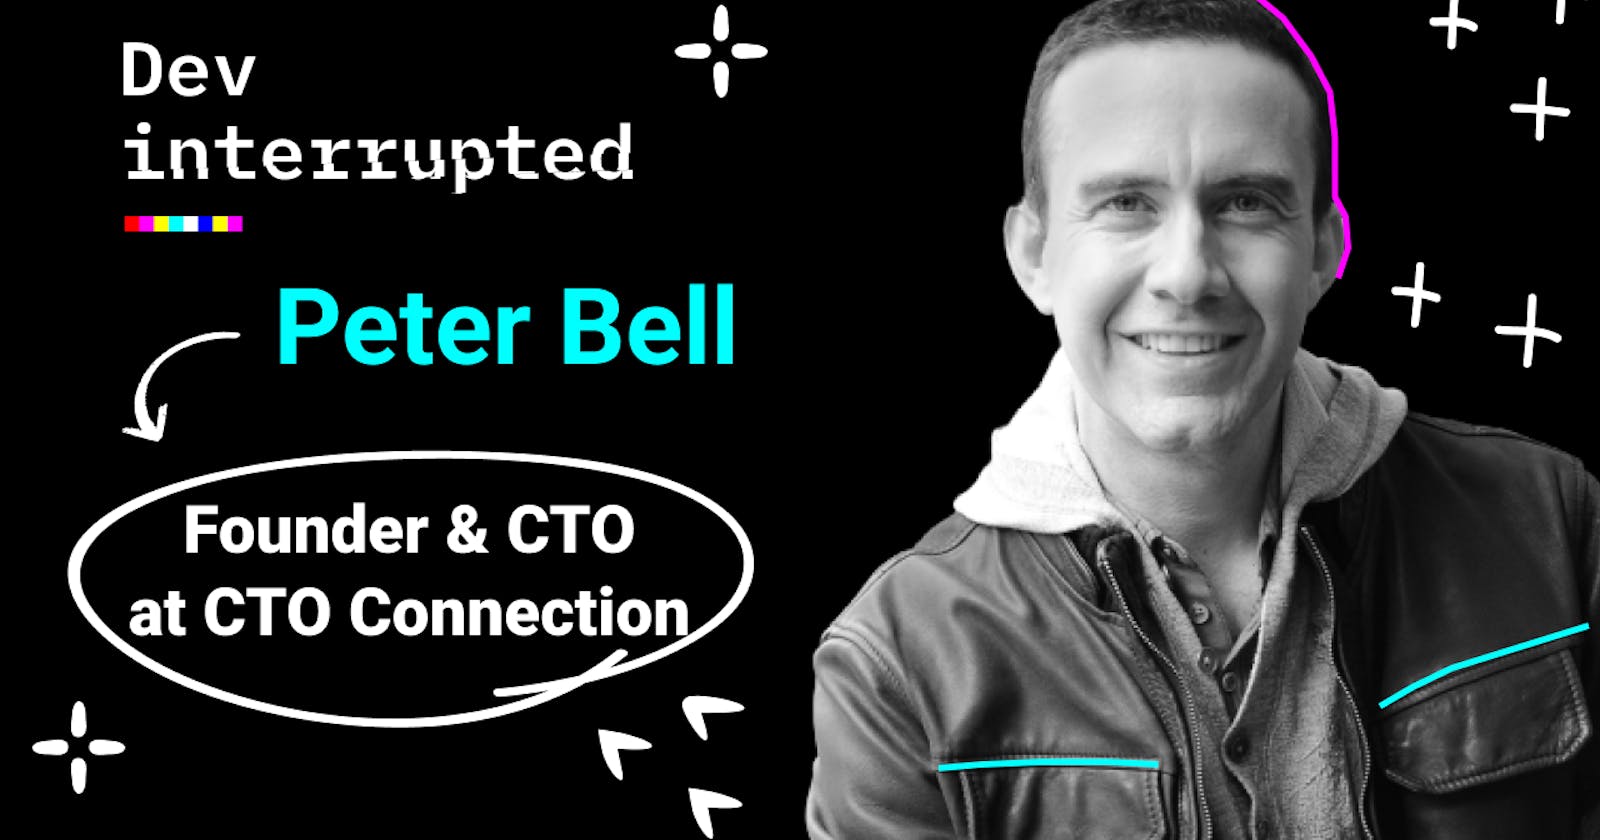 What If You Don't Want To Be a Developer Anymore? w/ CTO Connection's Peter Bell